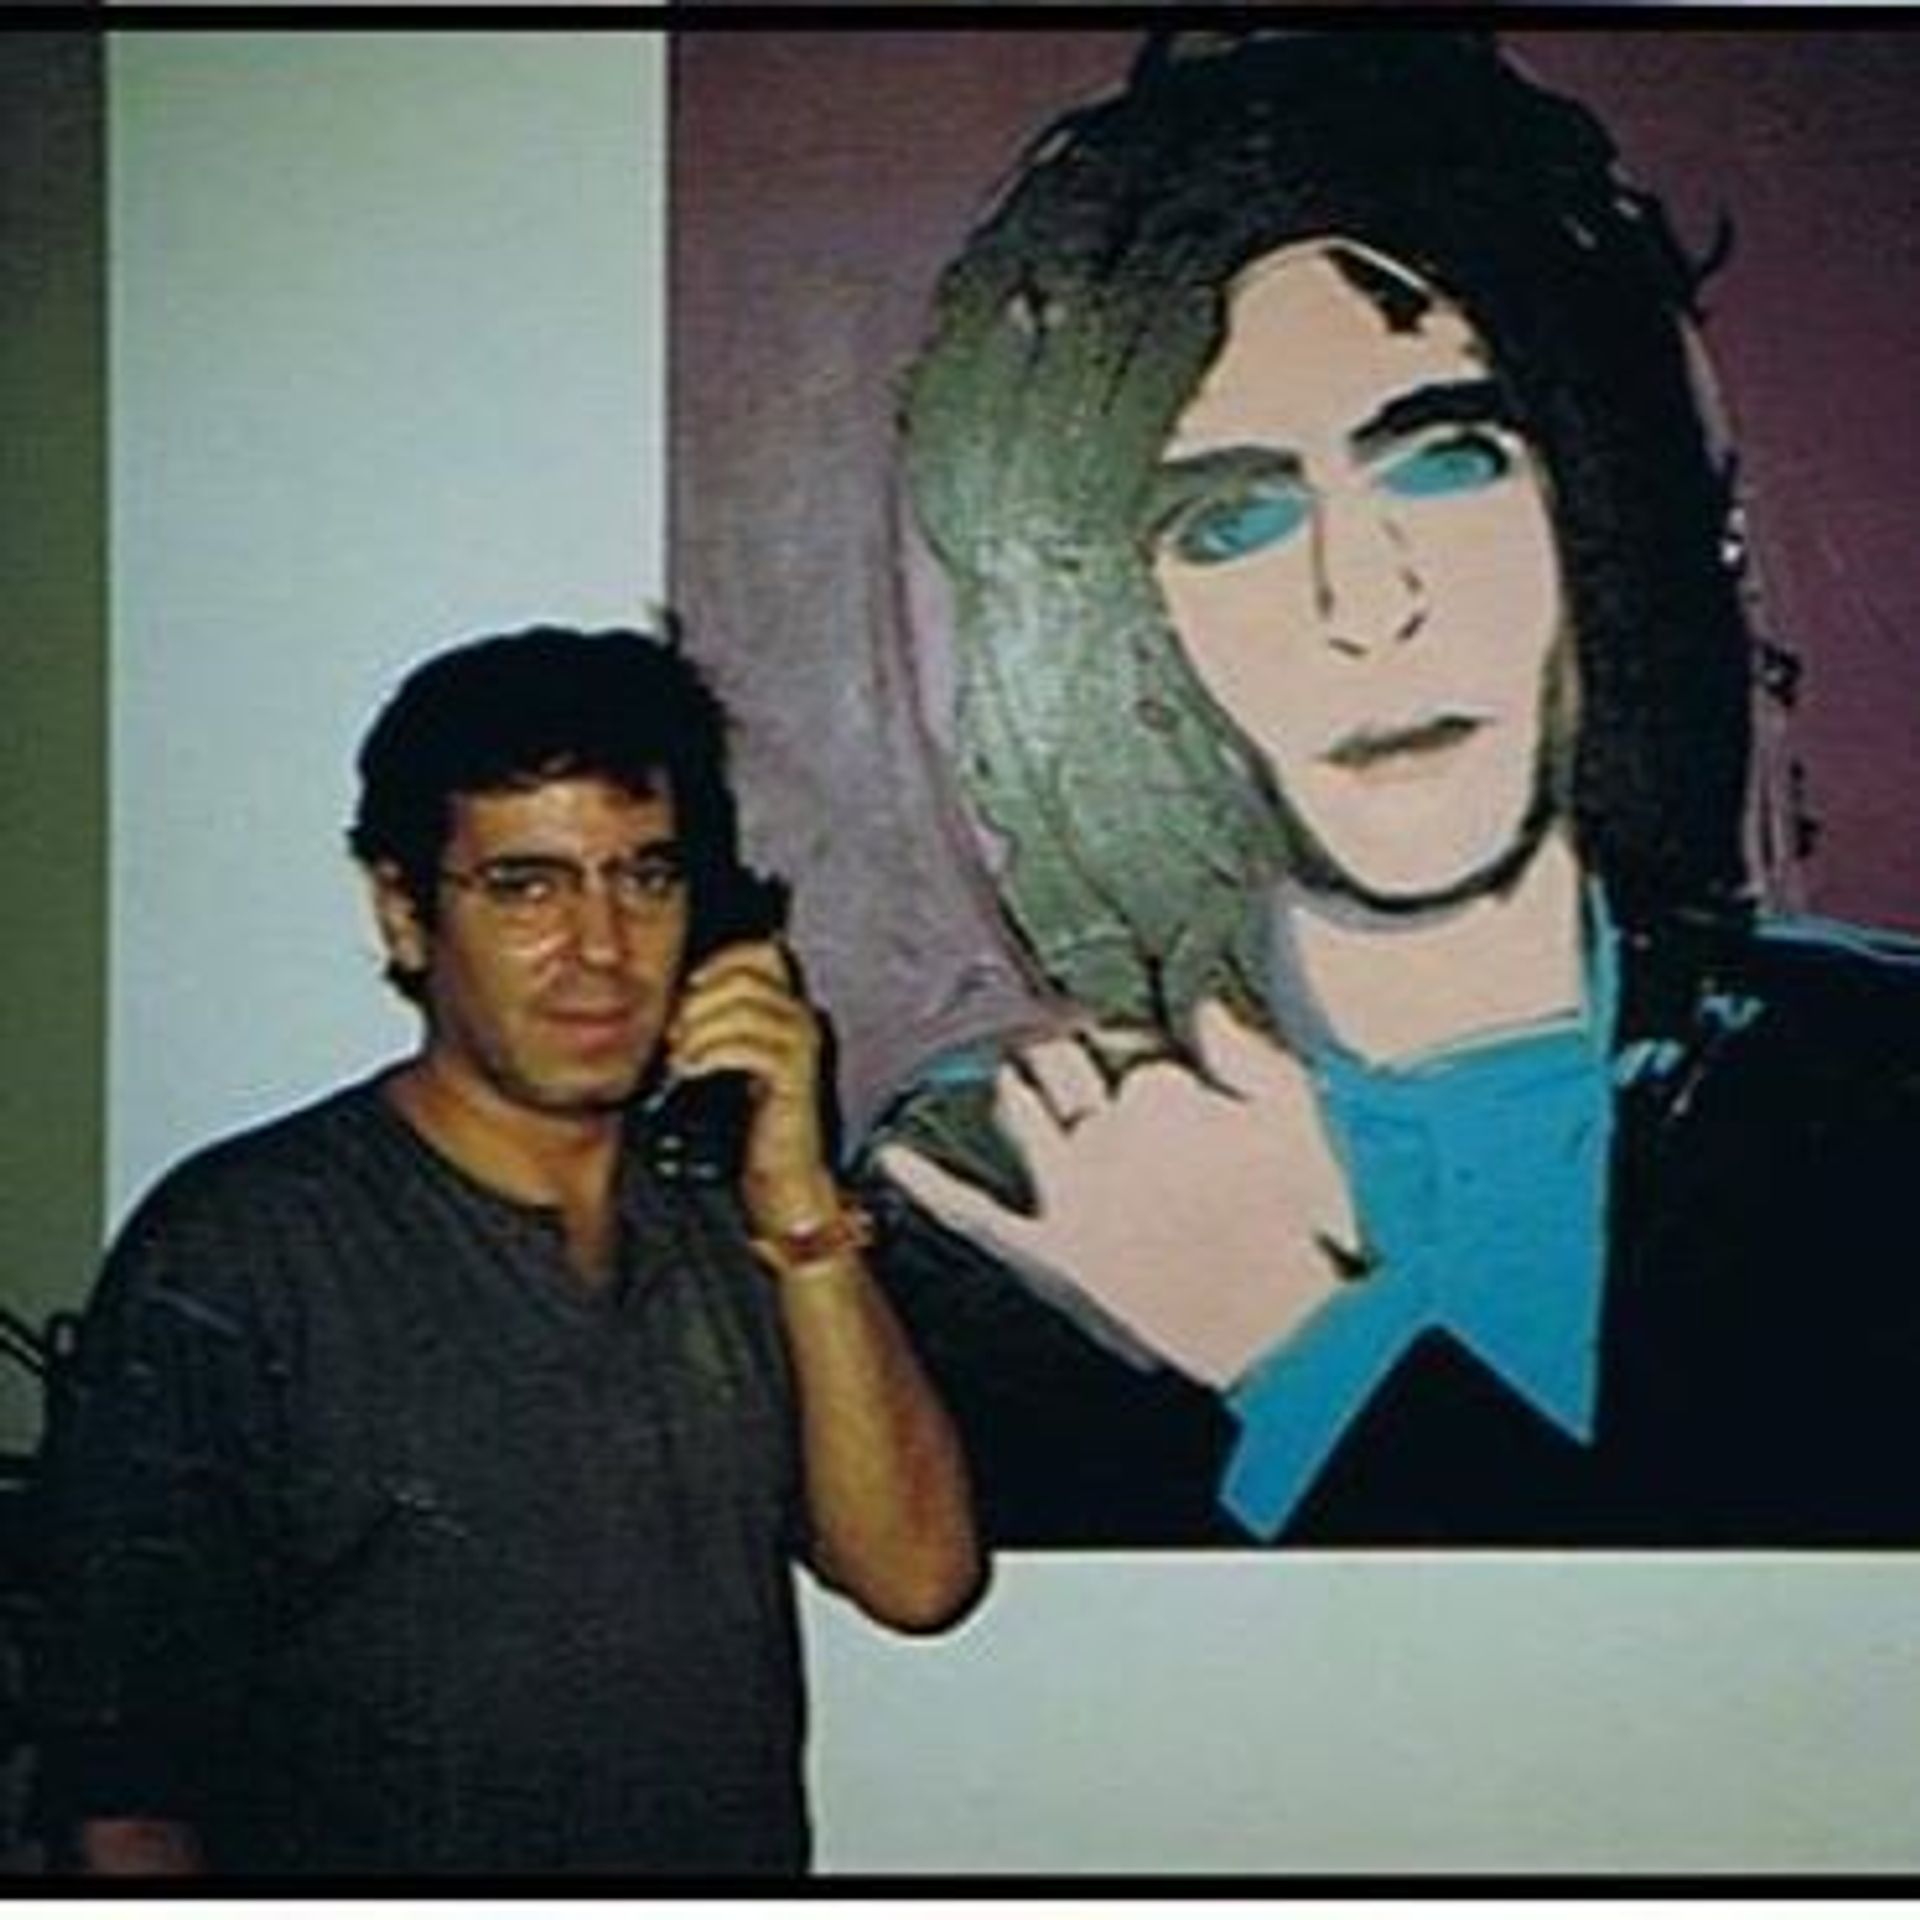 Todd Brassner with a portrait of him by his friend Andy Warhol Via Facebook